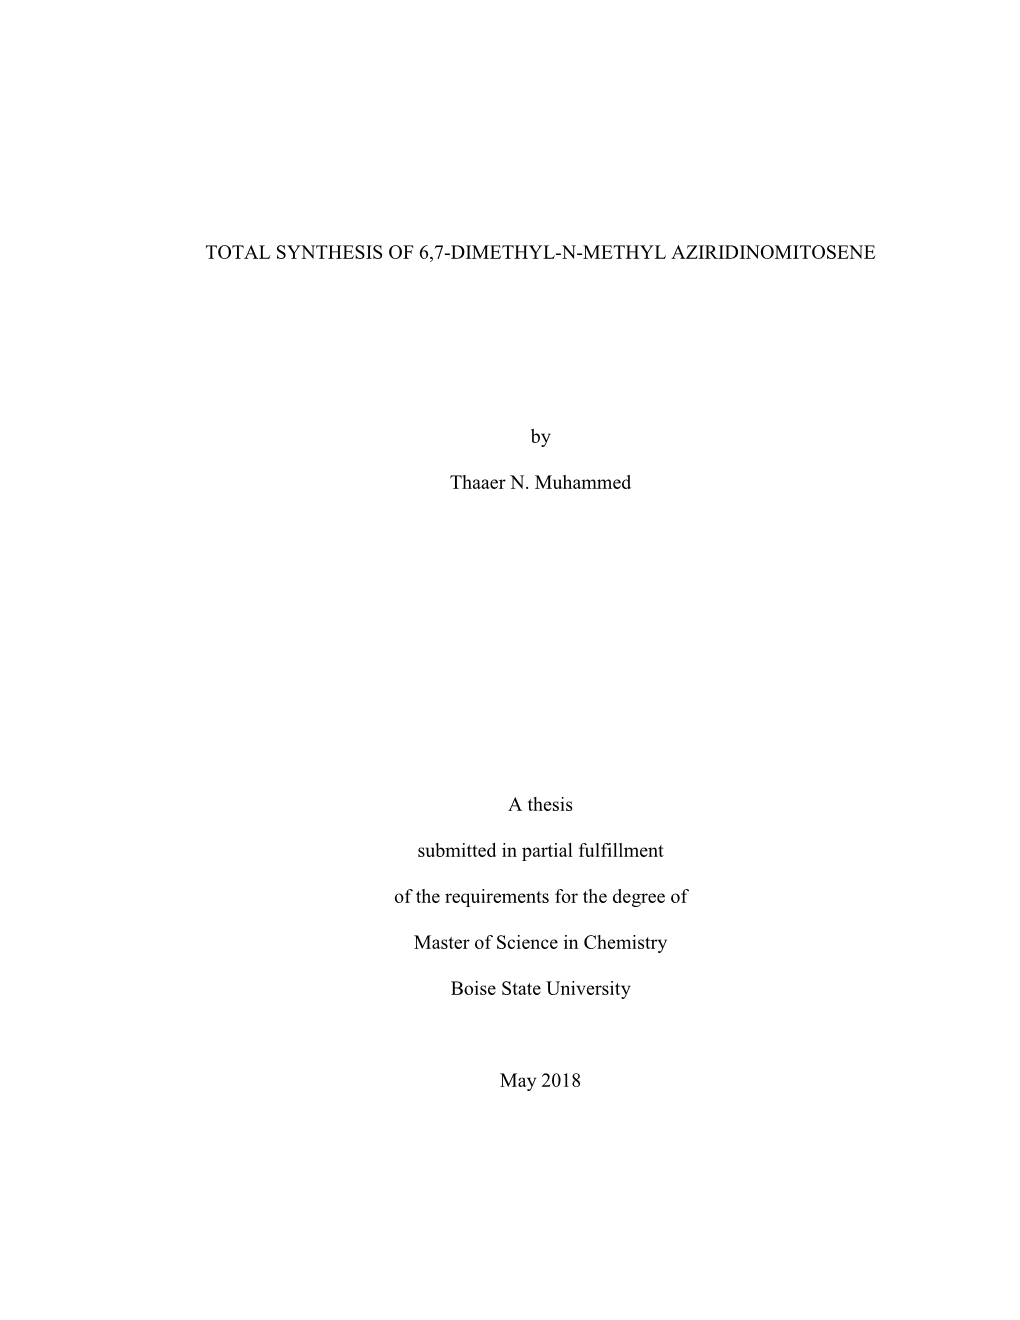 TOTAL SYNTHESIS of 6,7-DIMETHYL-N-METHYL AZIRIDINOMITOSENE by Thaaer N. Muhammed a Thesis Submitted in Partial Fulfillment of T